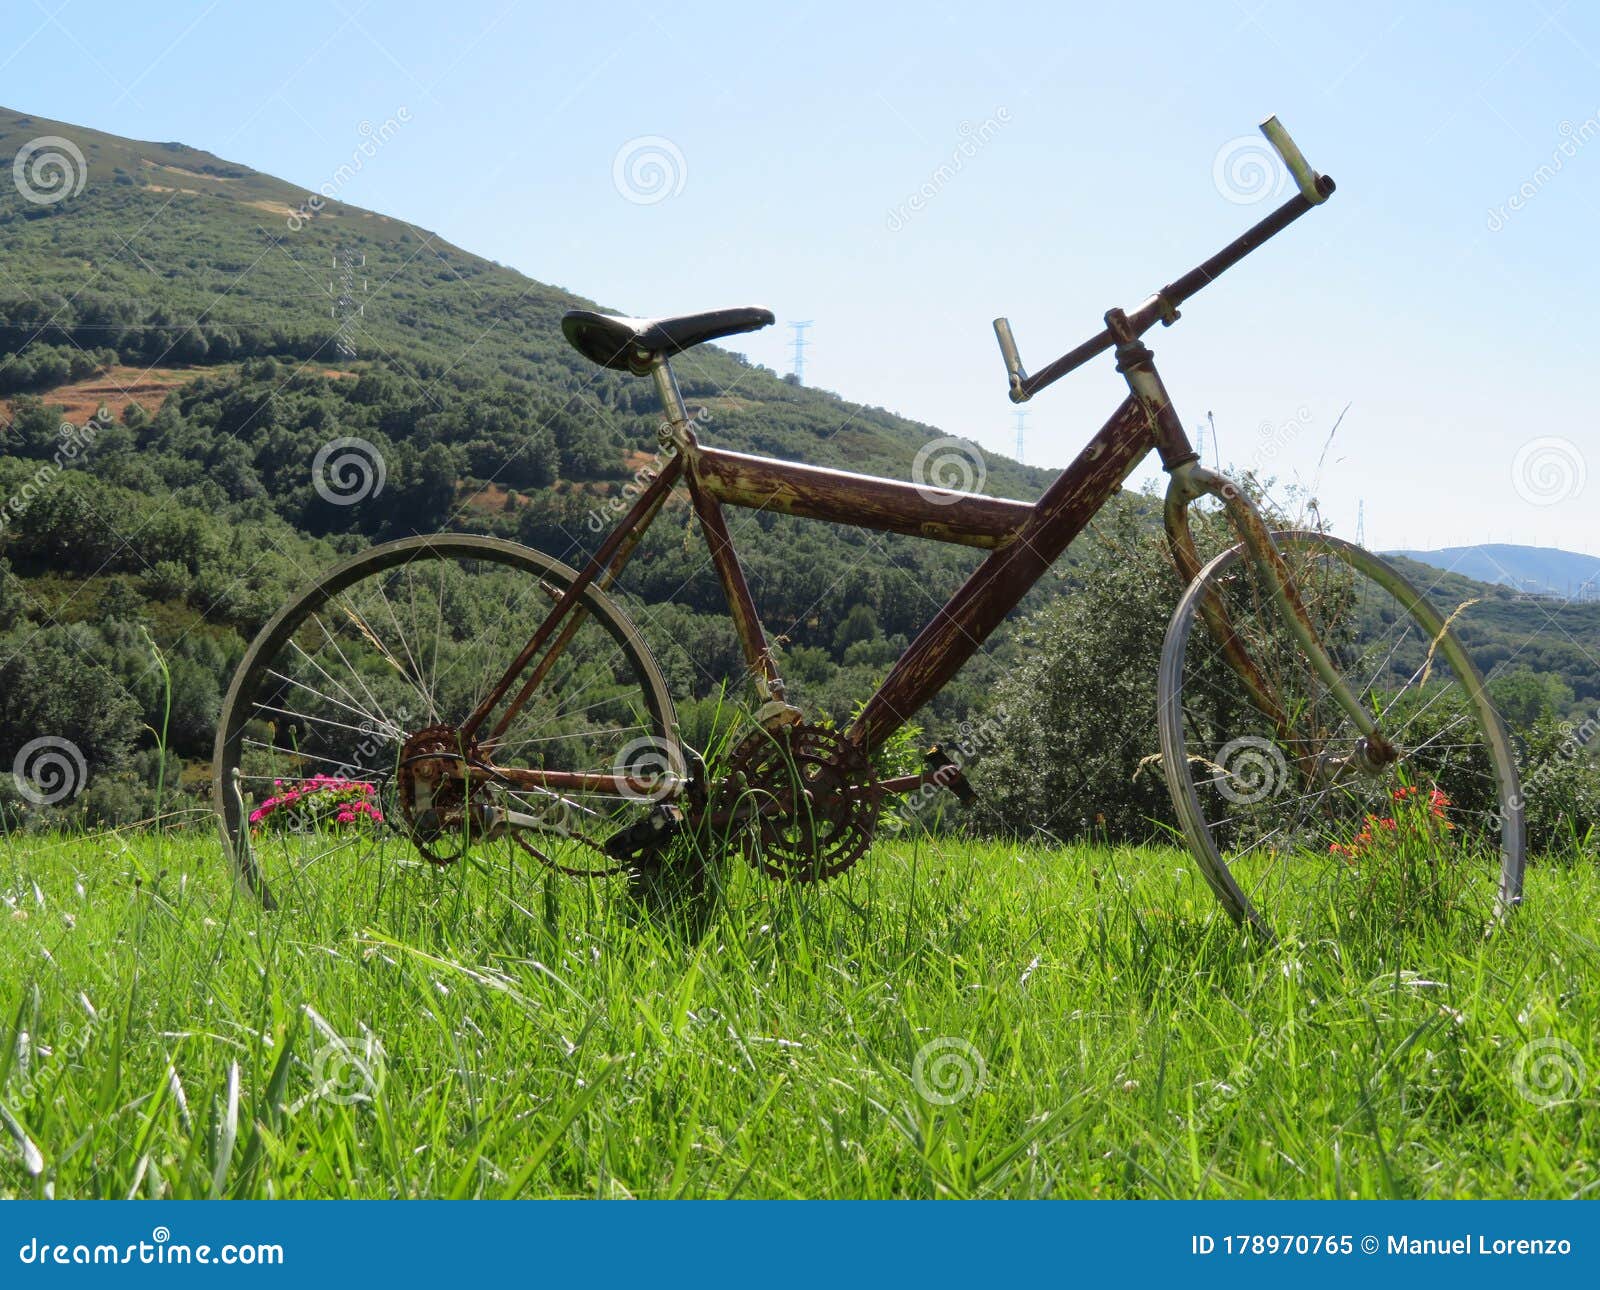 beautiful photo of a rusty old bicycle and abused